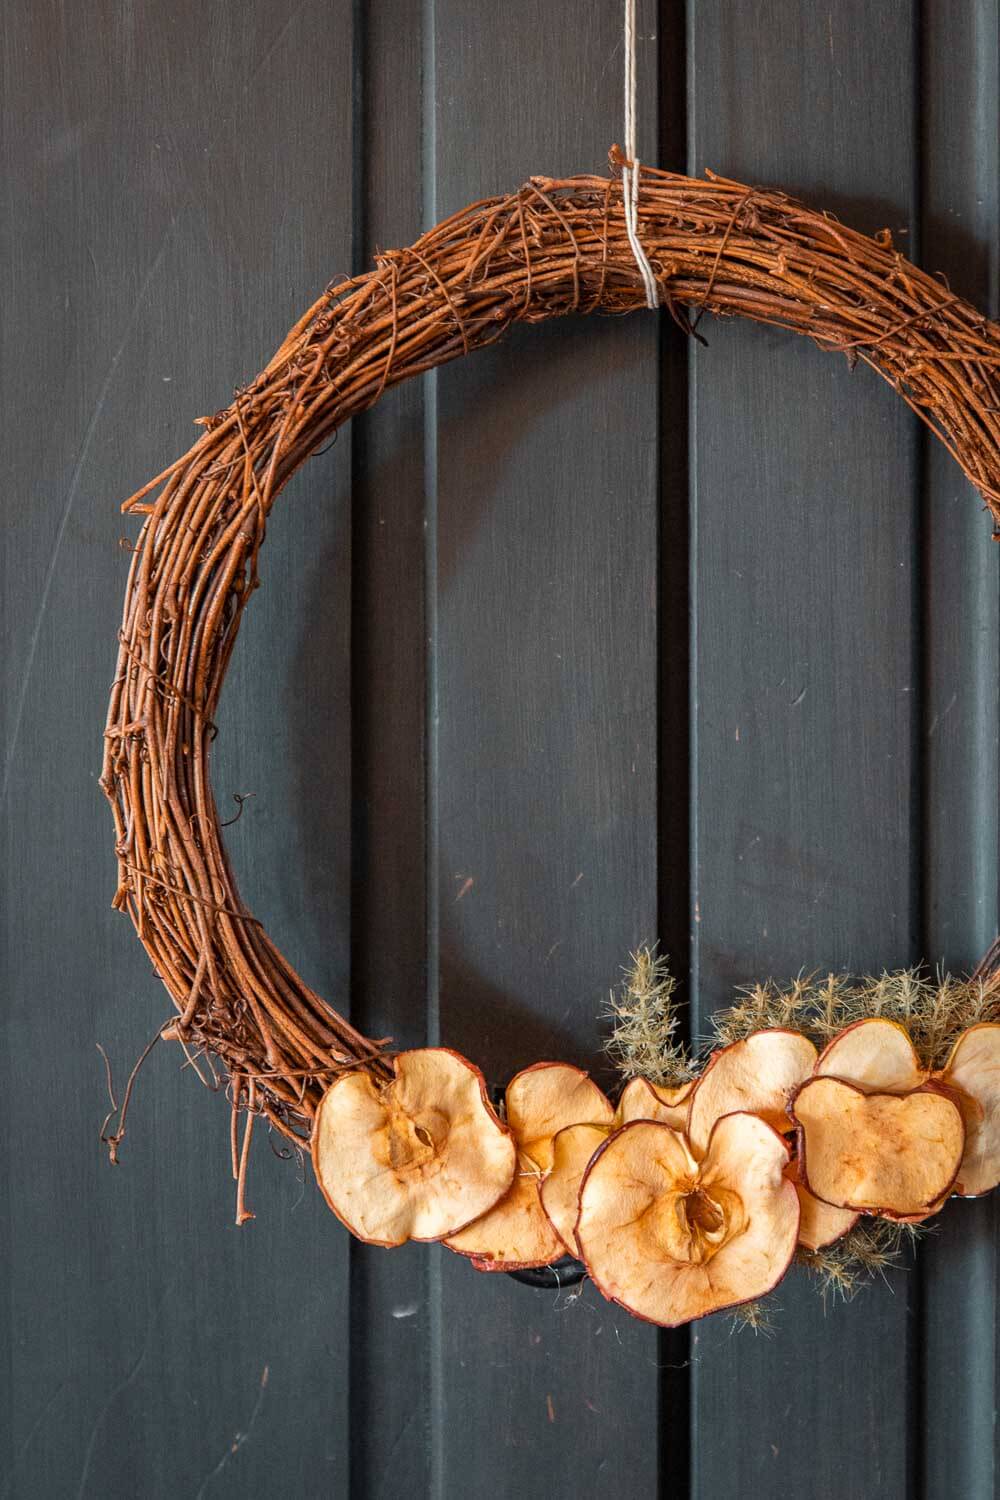 Wreath Making Tips: 12 Tools You Need to Get Started Making Wreaths